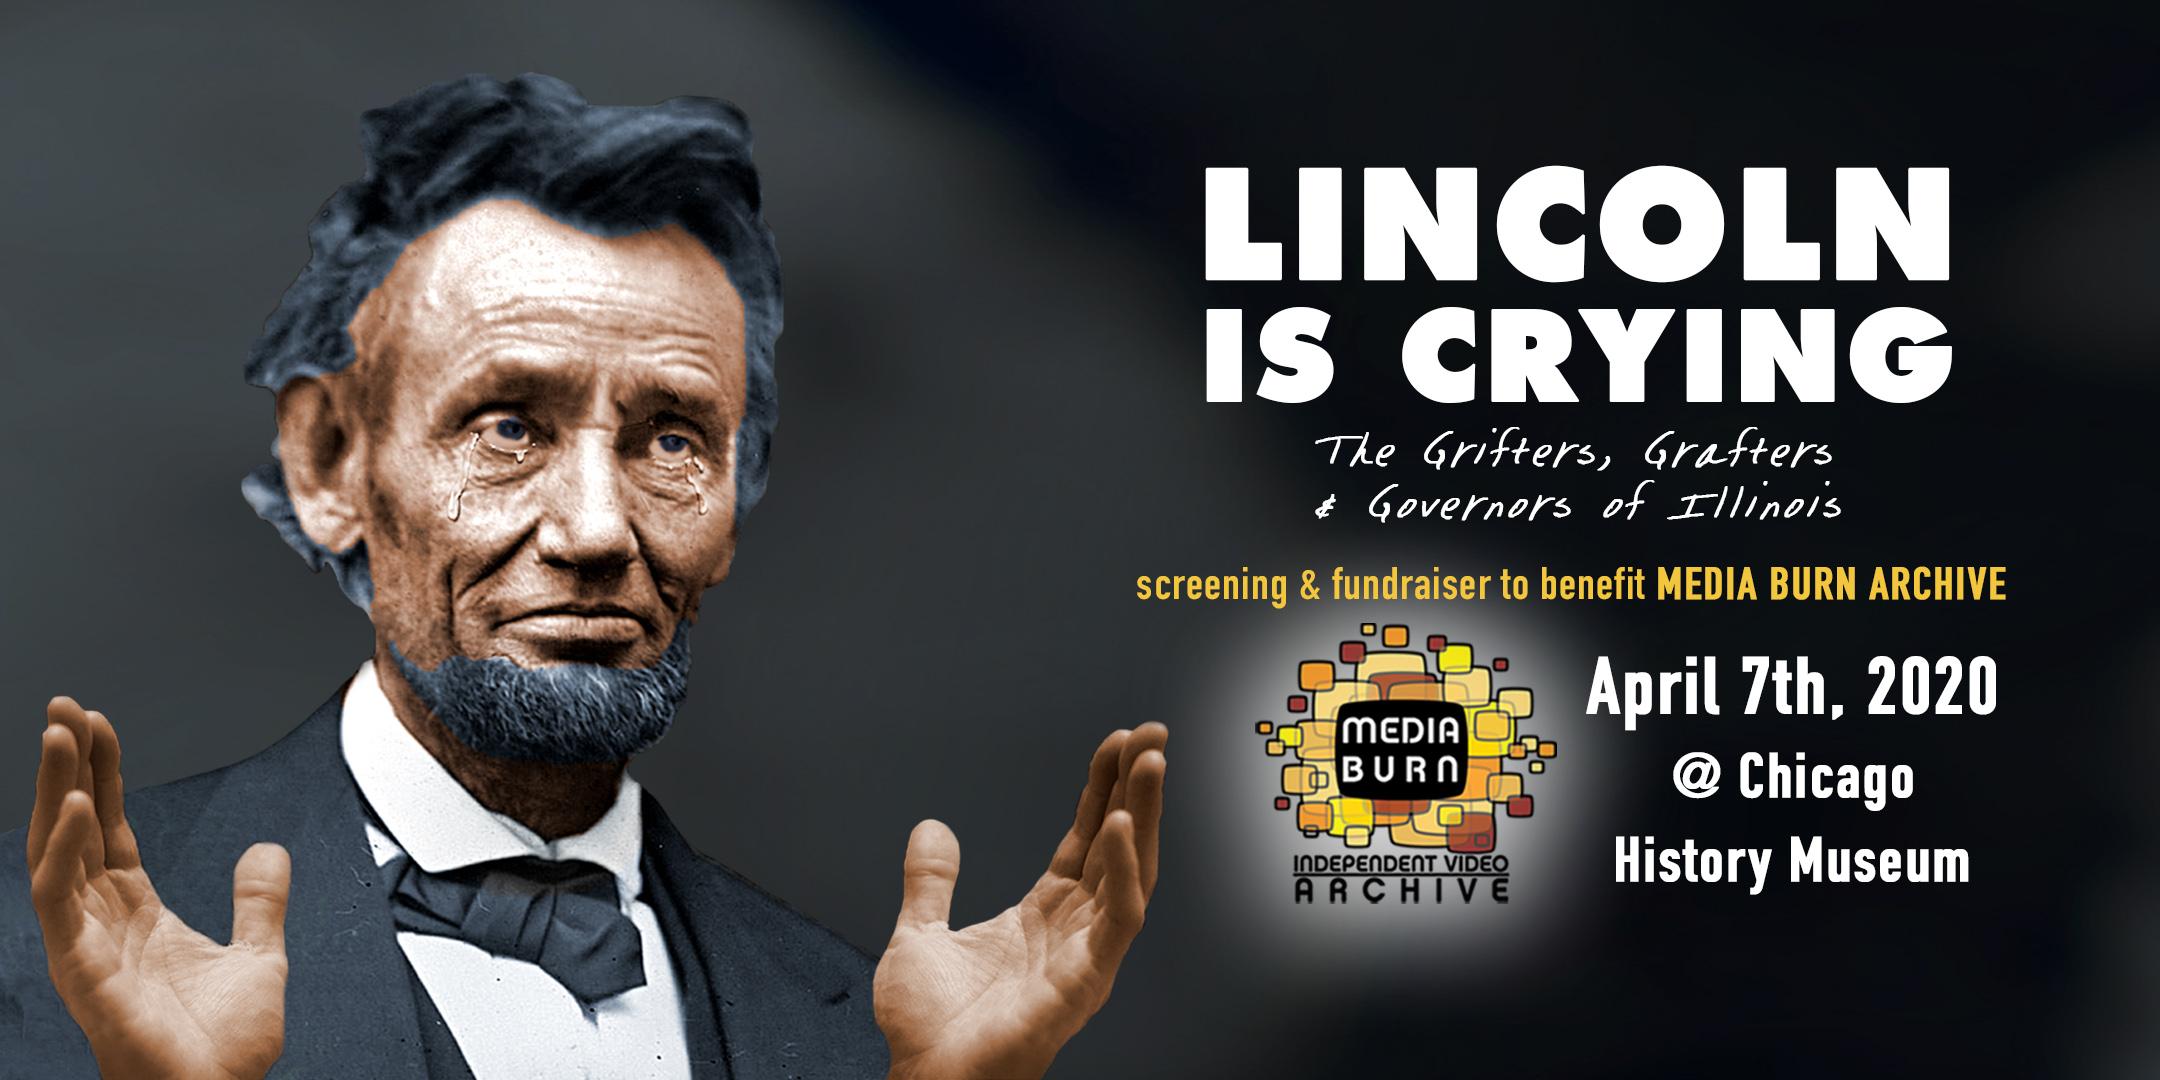 LINCOLN IS CRYING screening for Media Burn Archive